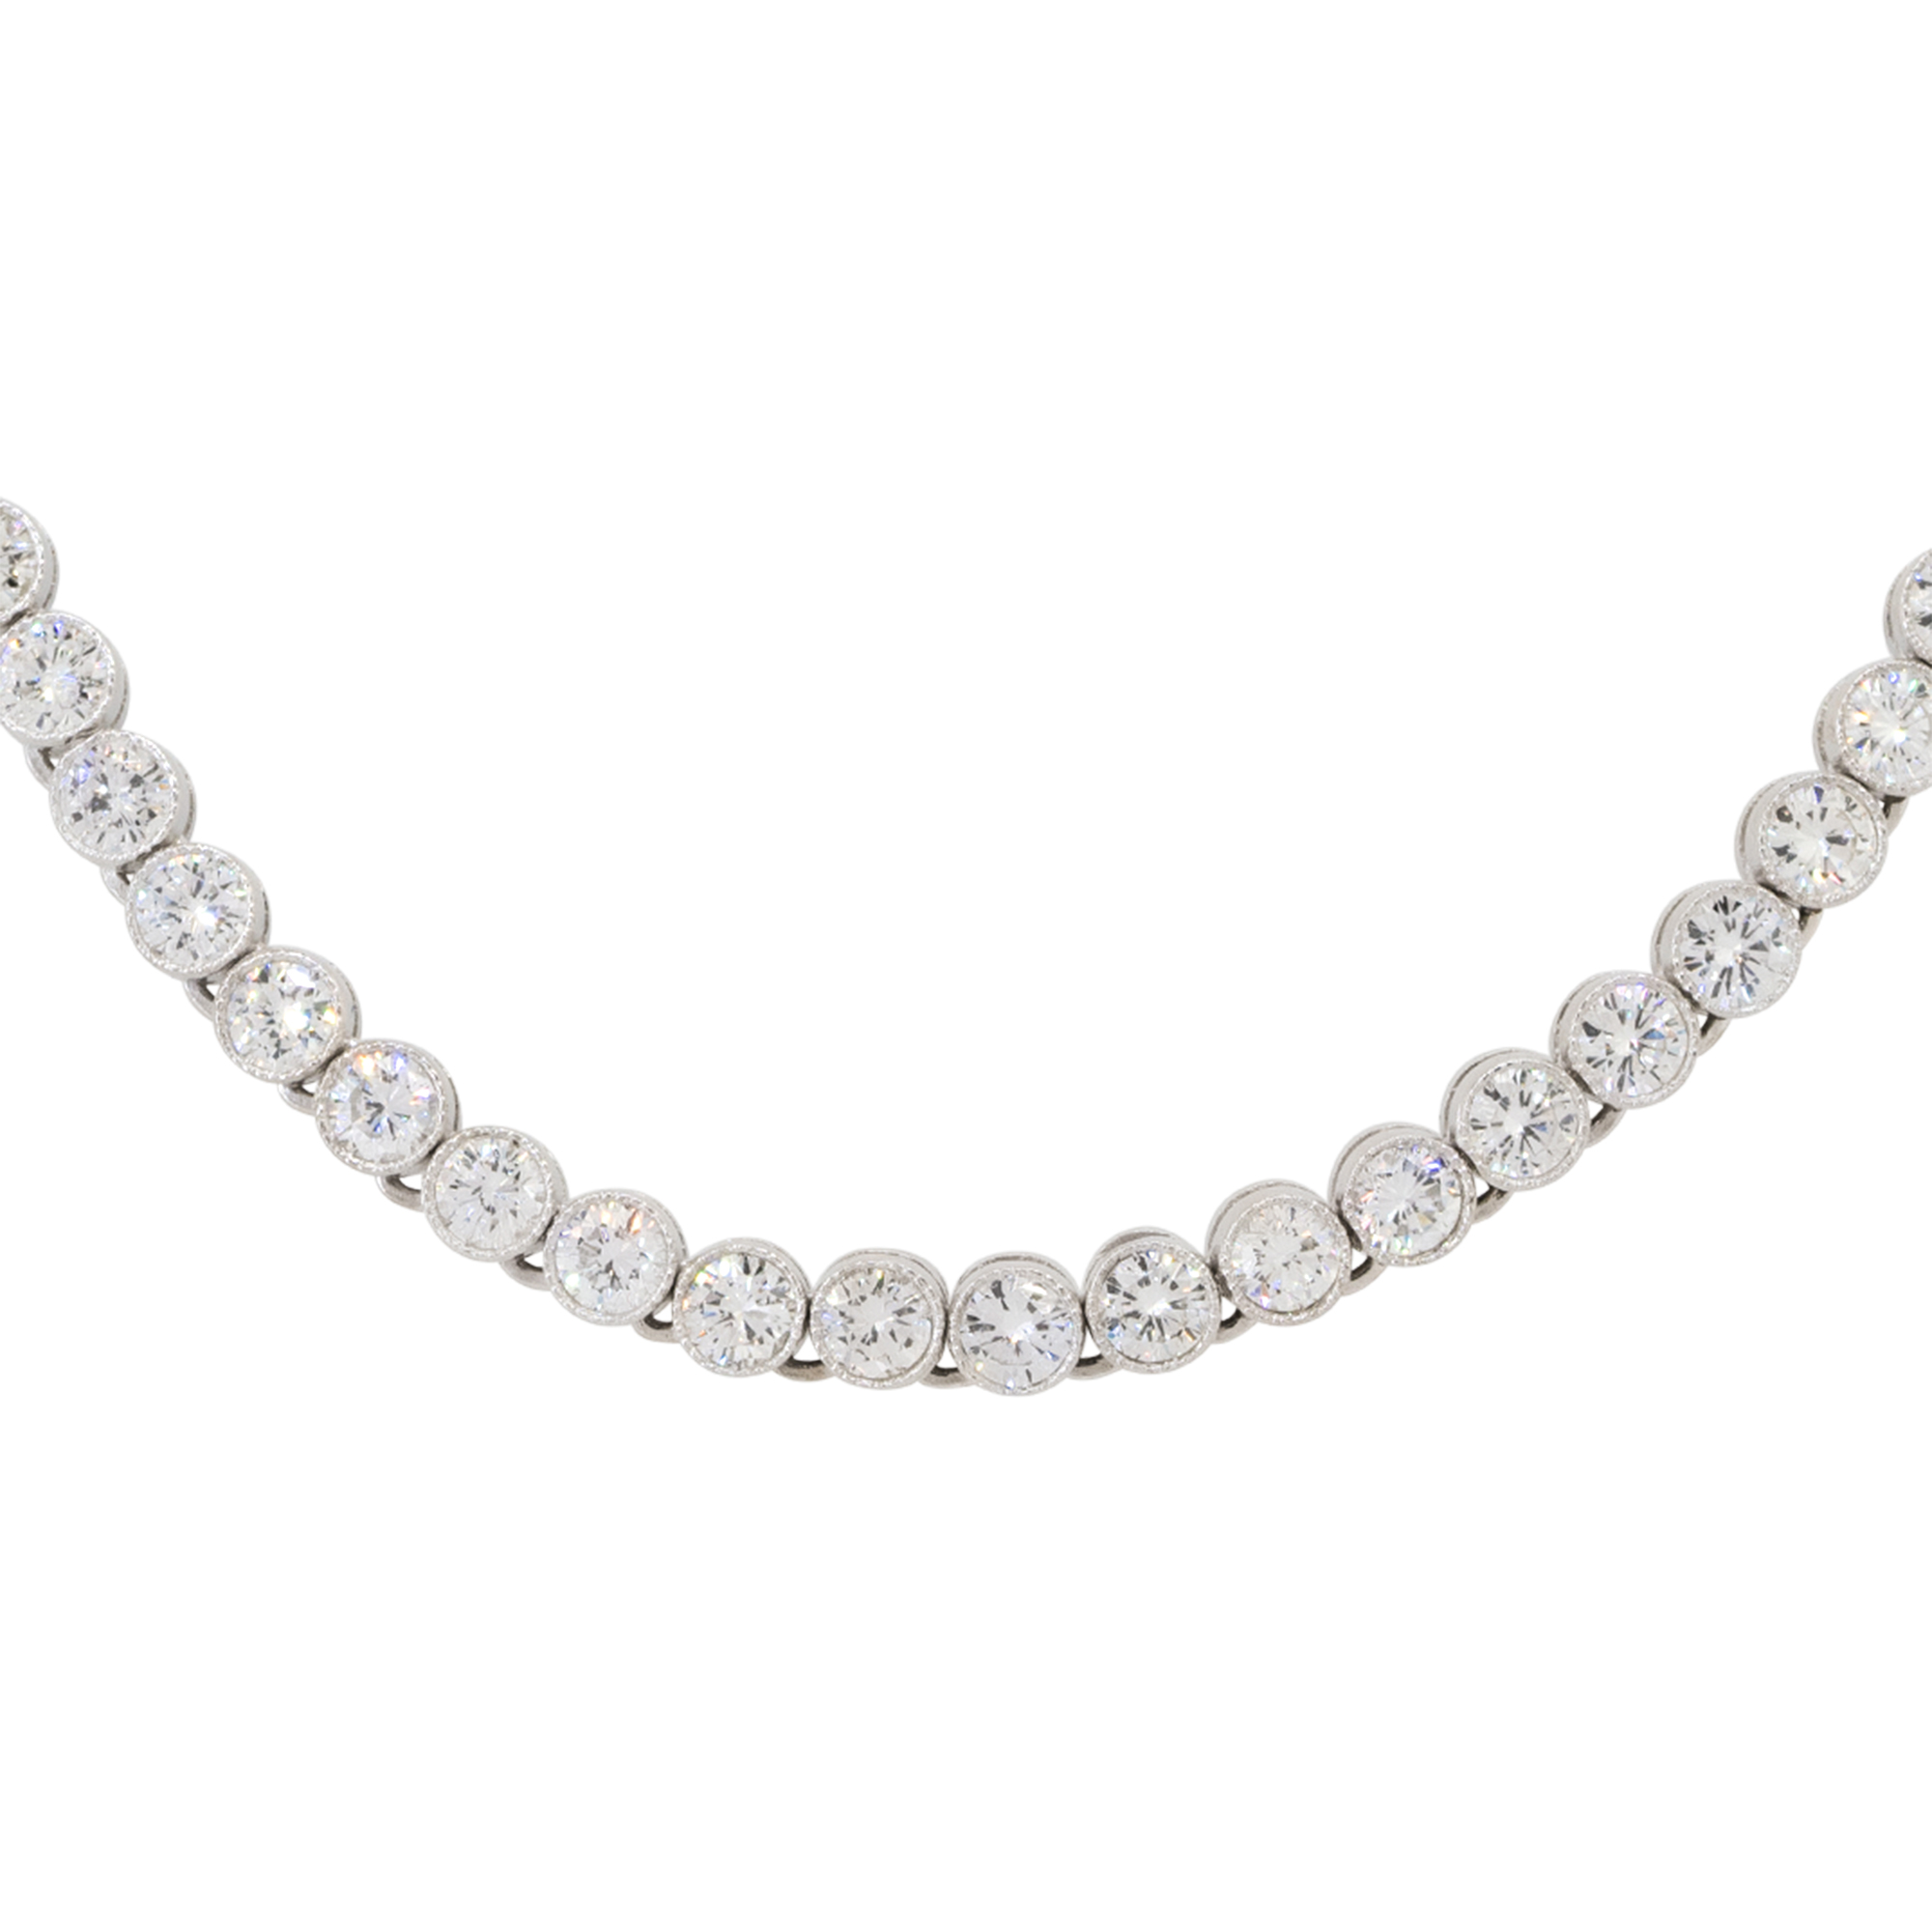 12 Ct Marquise Cut Simulated Diamond Tennis Necklace Set 14K White Gold  Plated. | eBay